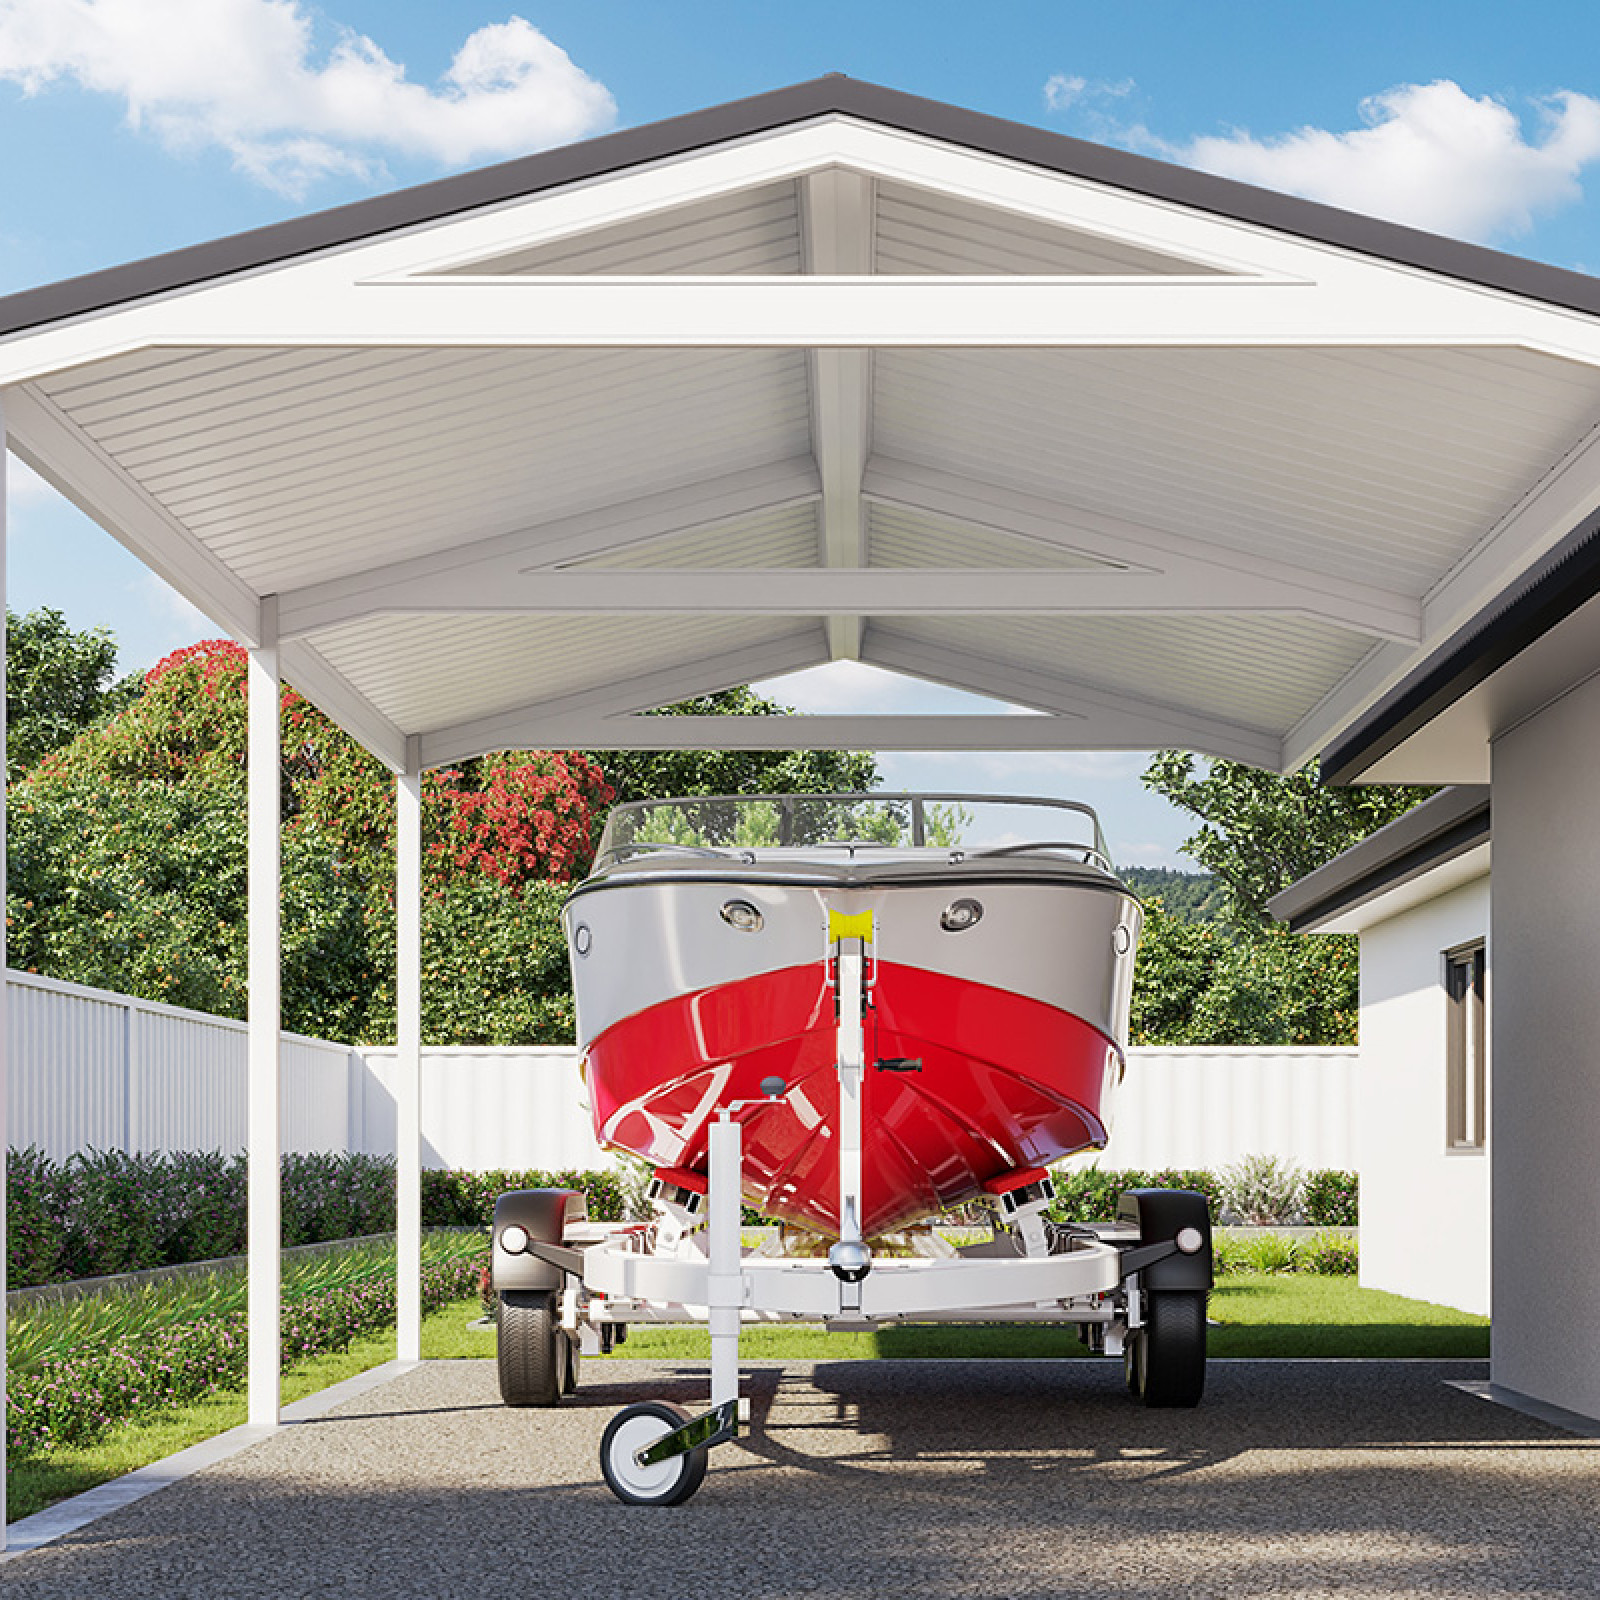 Red and white boat parked under a gable roof carport